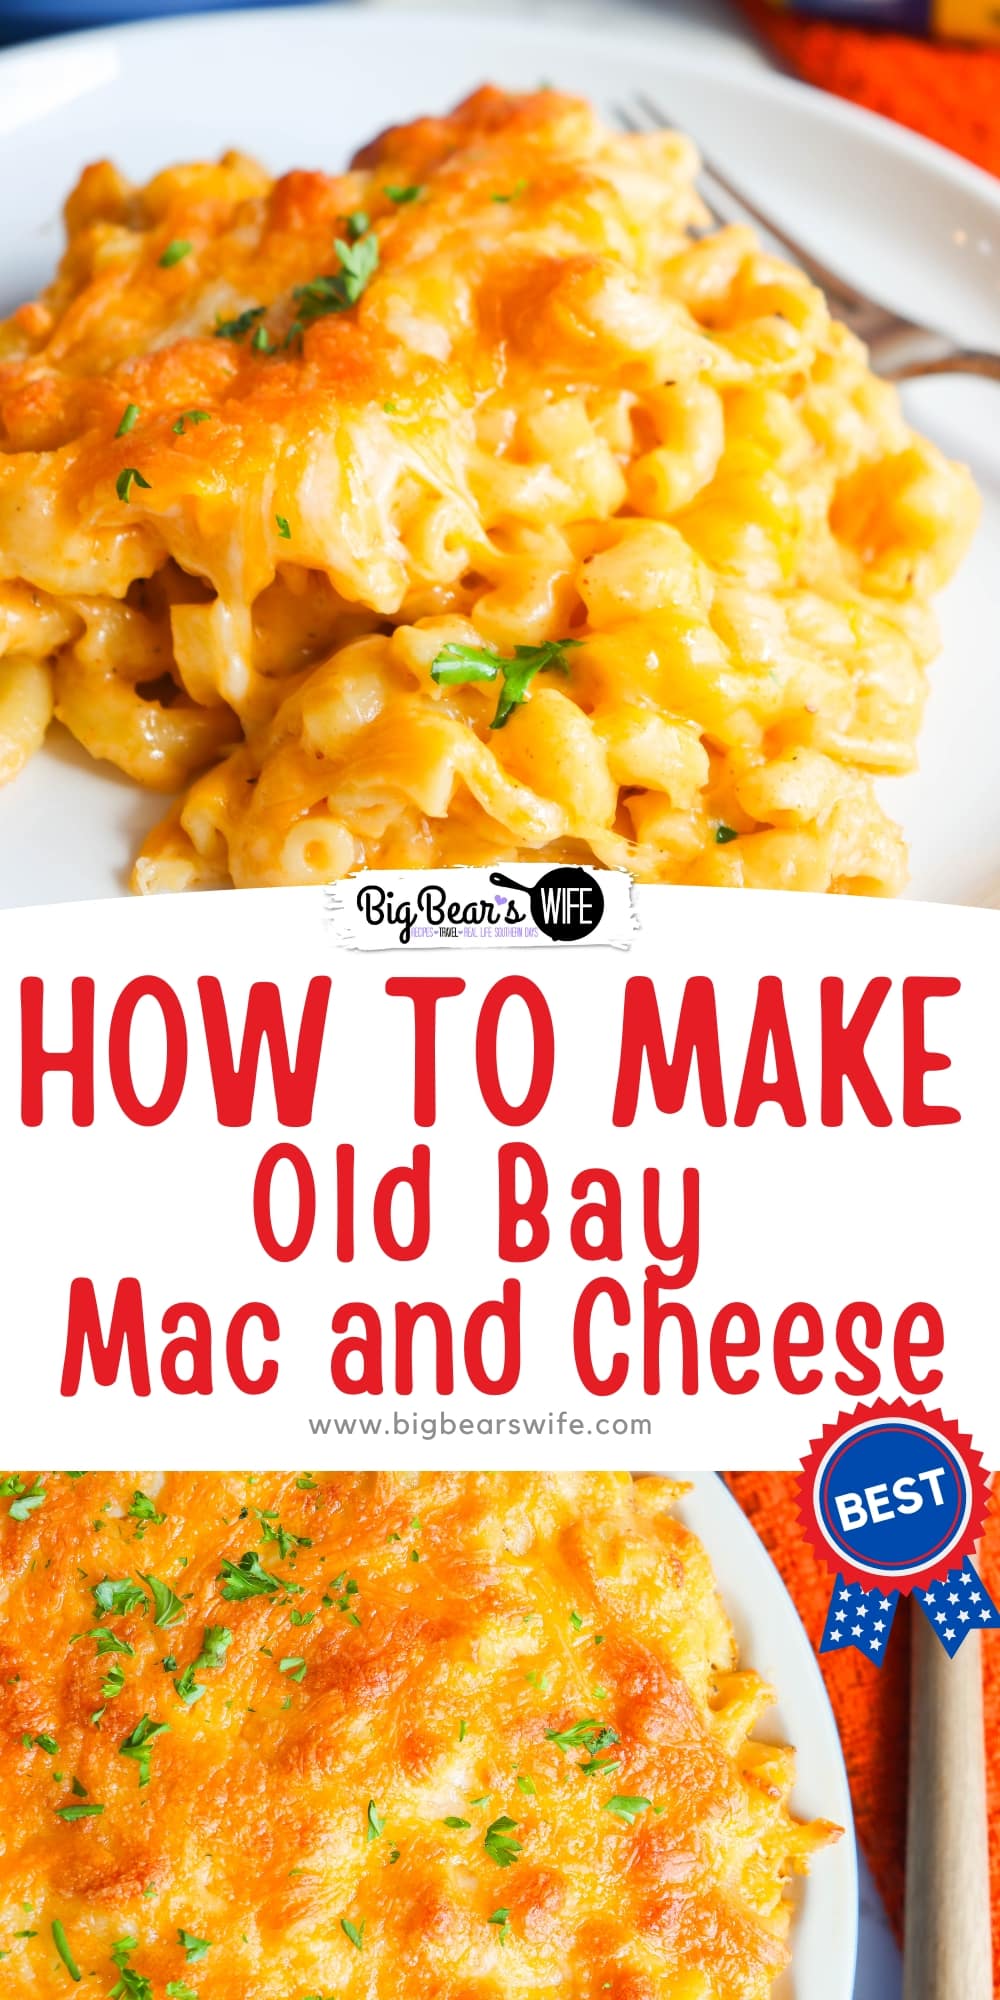 Learn how to elevate your regular mac and cheese game by adding a touch of Old Bay seasoning in this homemade Old Bay Mac and Cheese. Unleash the secret ingredient that will take this comfort food favorite to the next level. via @bigbearswife